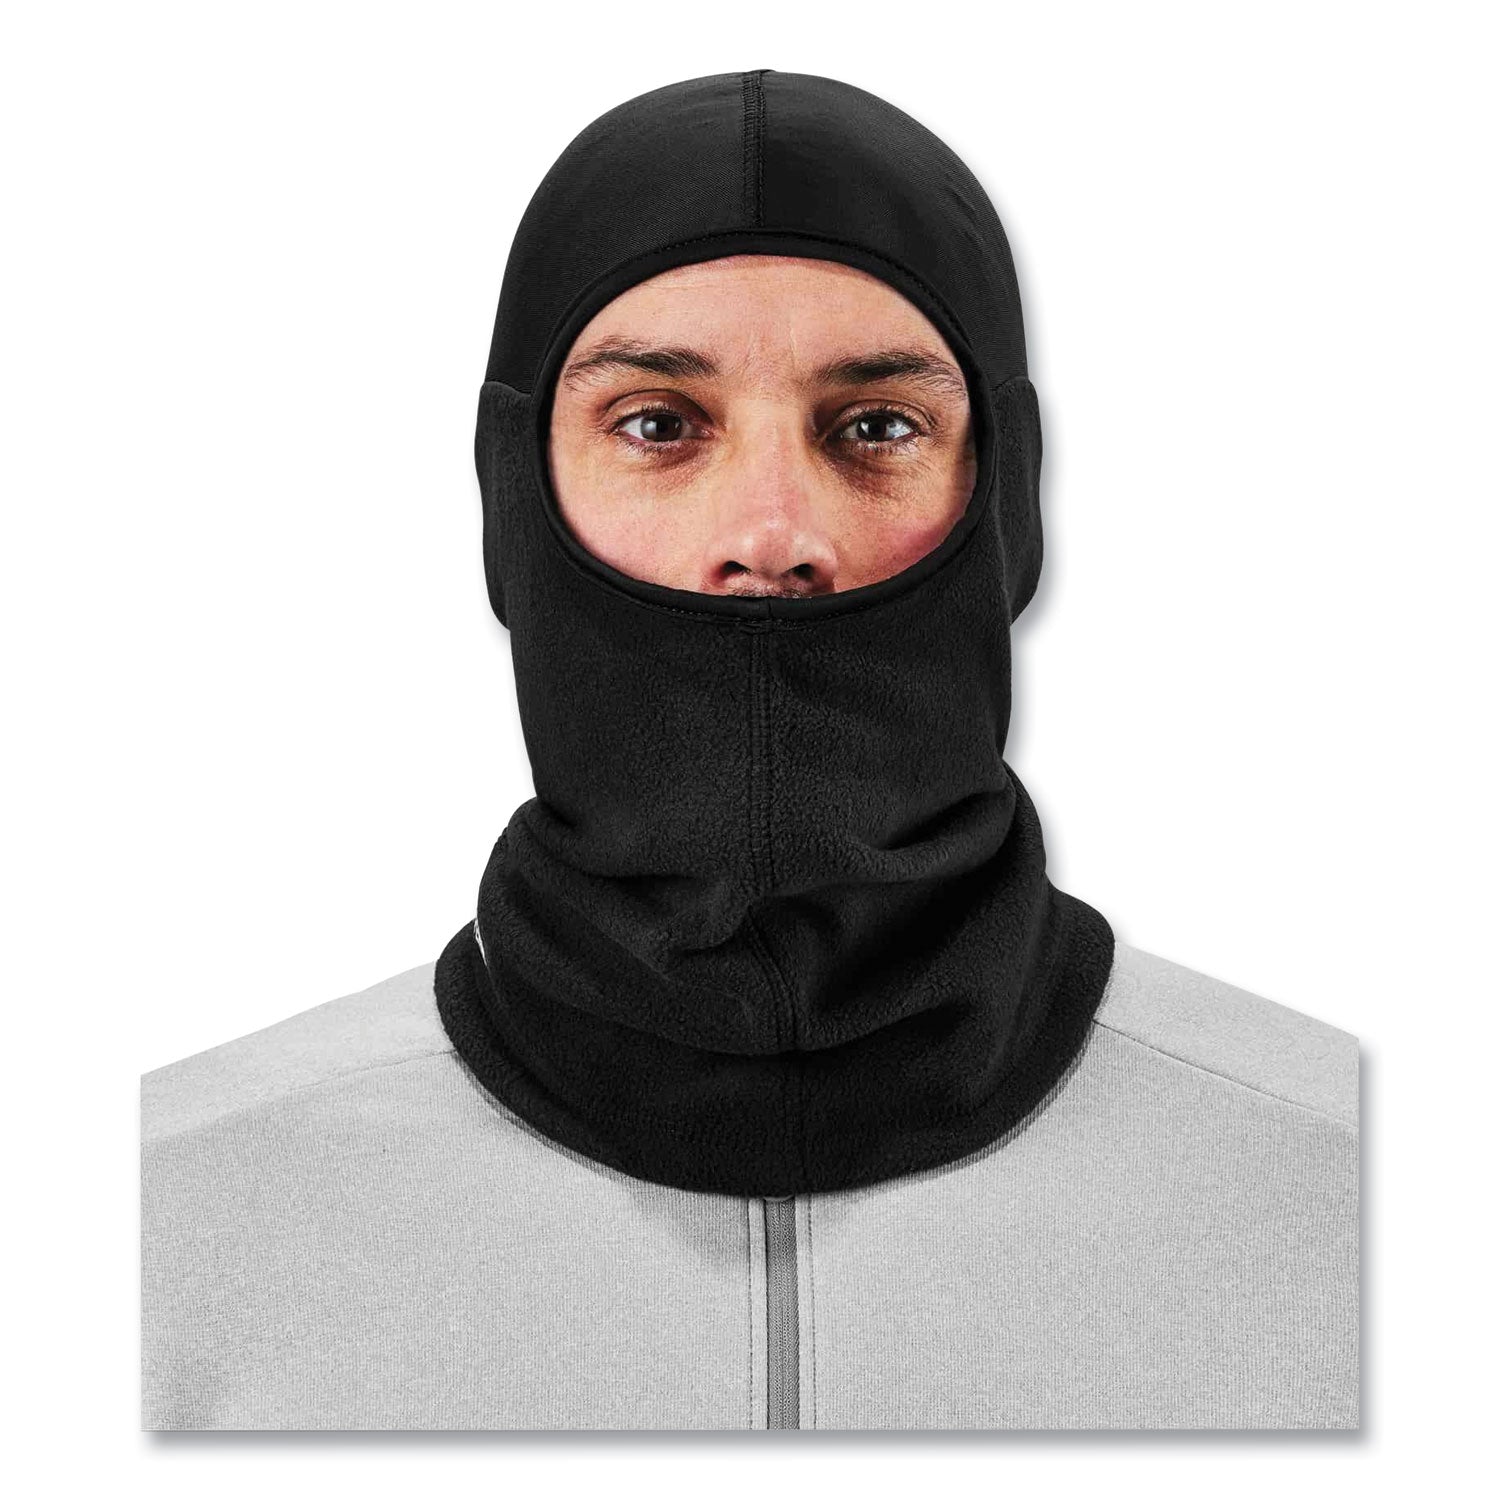 n-ferno-6822-balaclava-spandex-top-face-mask-spandex-fleece-one-size-fits-most-black-ships-in-1-3-business-days_ego16822 - 2